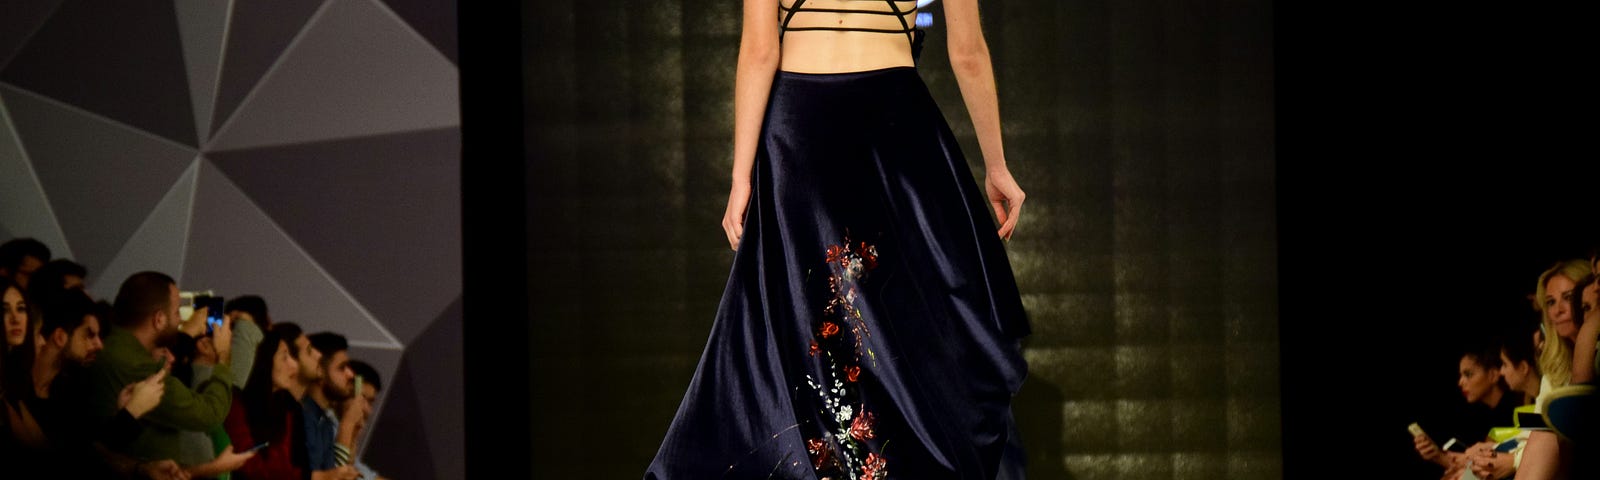 View from the back of a model on a catwalk wearing a long black gown with thin straps crossed across the back.